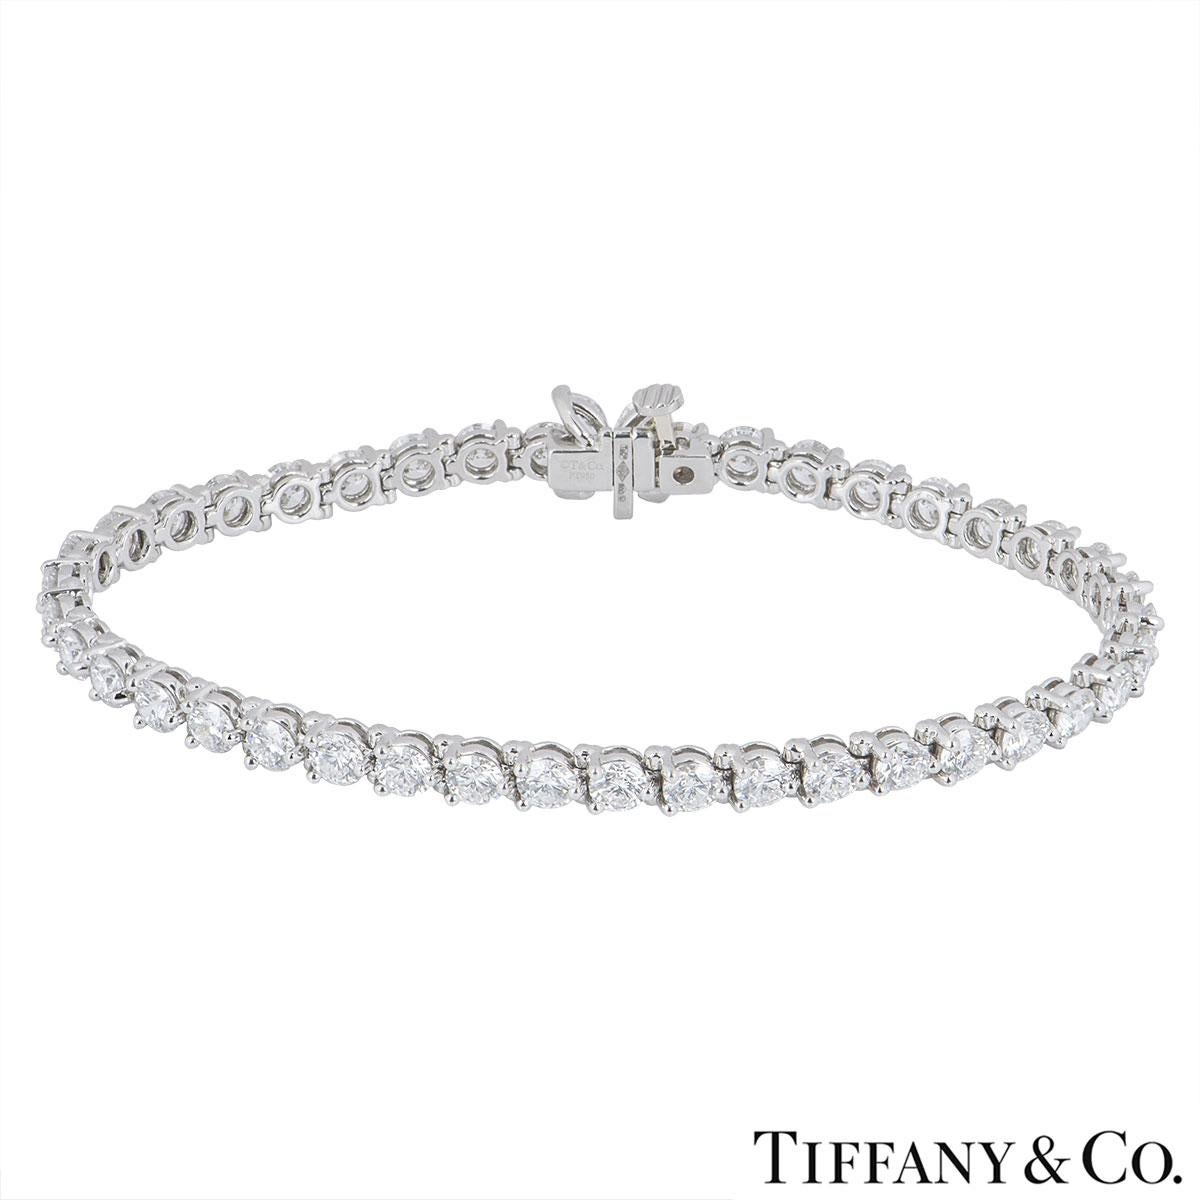 A stunning platinum diamond bracelet by Tiffany & Co. from the Victoria collection. The bracelet is made up of 40 round brilliant cut diamonds and 4 marquise cut diamonds. The round brilliant cut diamonds have a total weight of 6.22ct and the